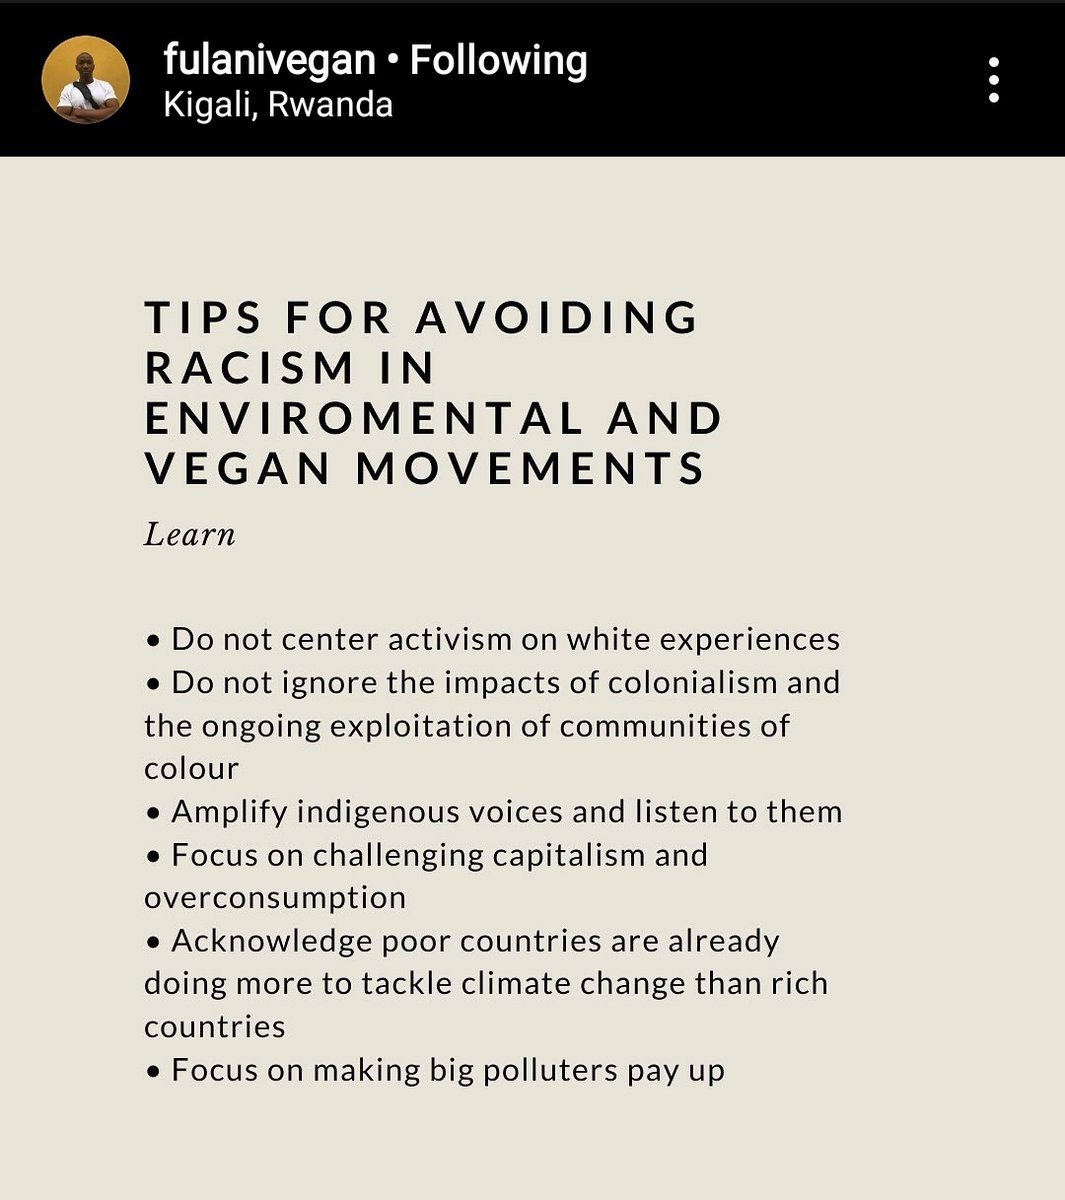 If you are white, like me. Here are the things we can do along with holding Sir Attenborough (and anyone spreading overpopulation being the problem) to account. He has a huge influence on white environmentalists, we can’t let this fly.  Thank you  @fulanivegan for this list.